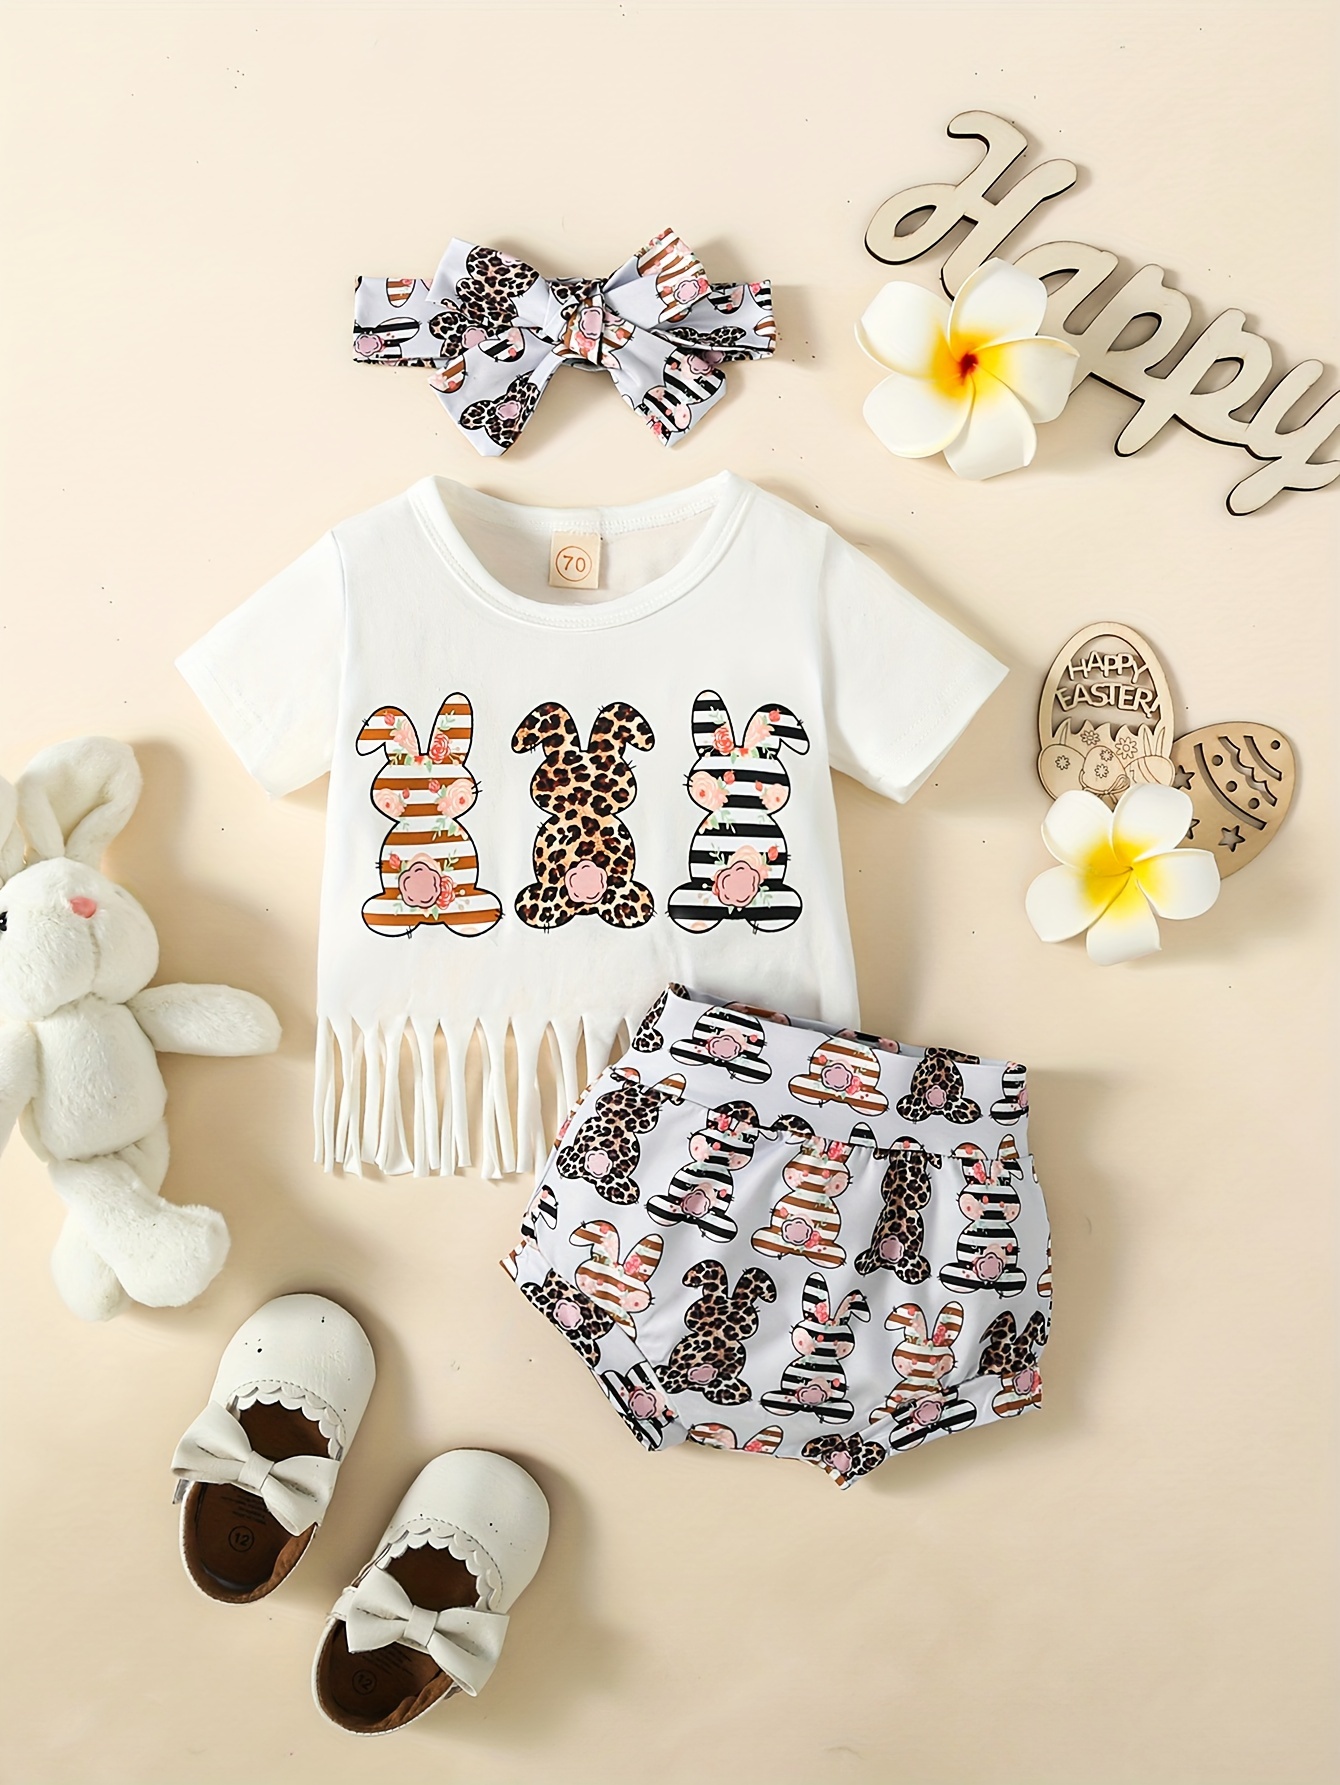 Infant Baby Boy Easter Outfit Mr Steal Your Eggs Bunny Short Sleeve T-Shirt  Top Pants Set Toddler 2Pcs Summer Clothes